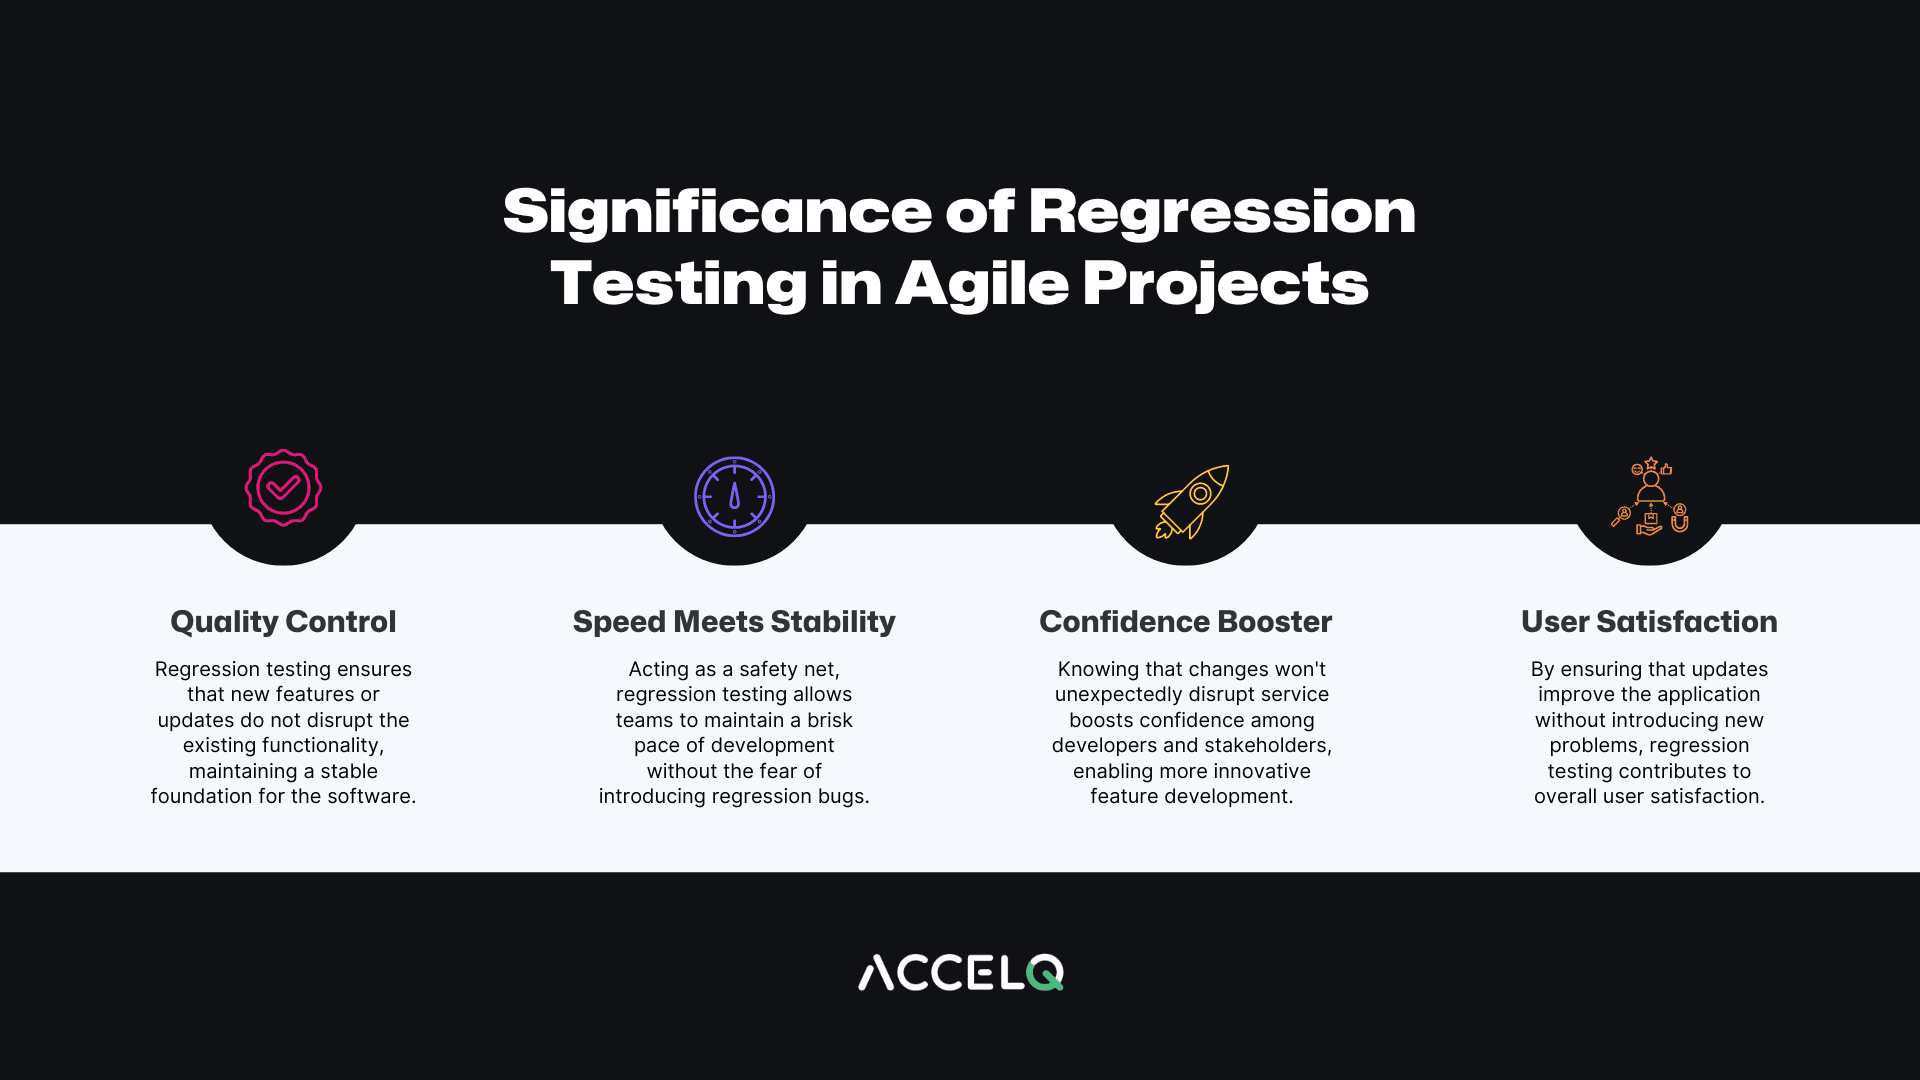 Regression testing in Agile Projects